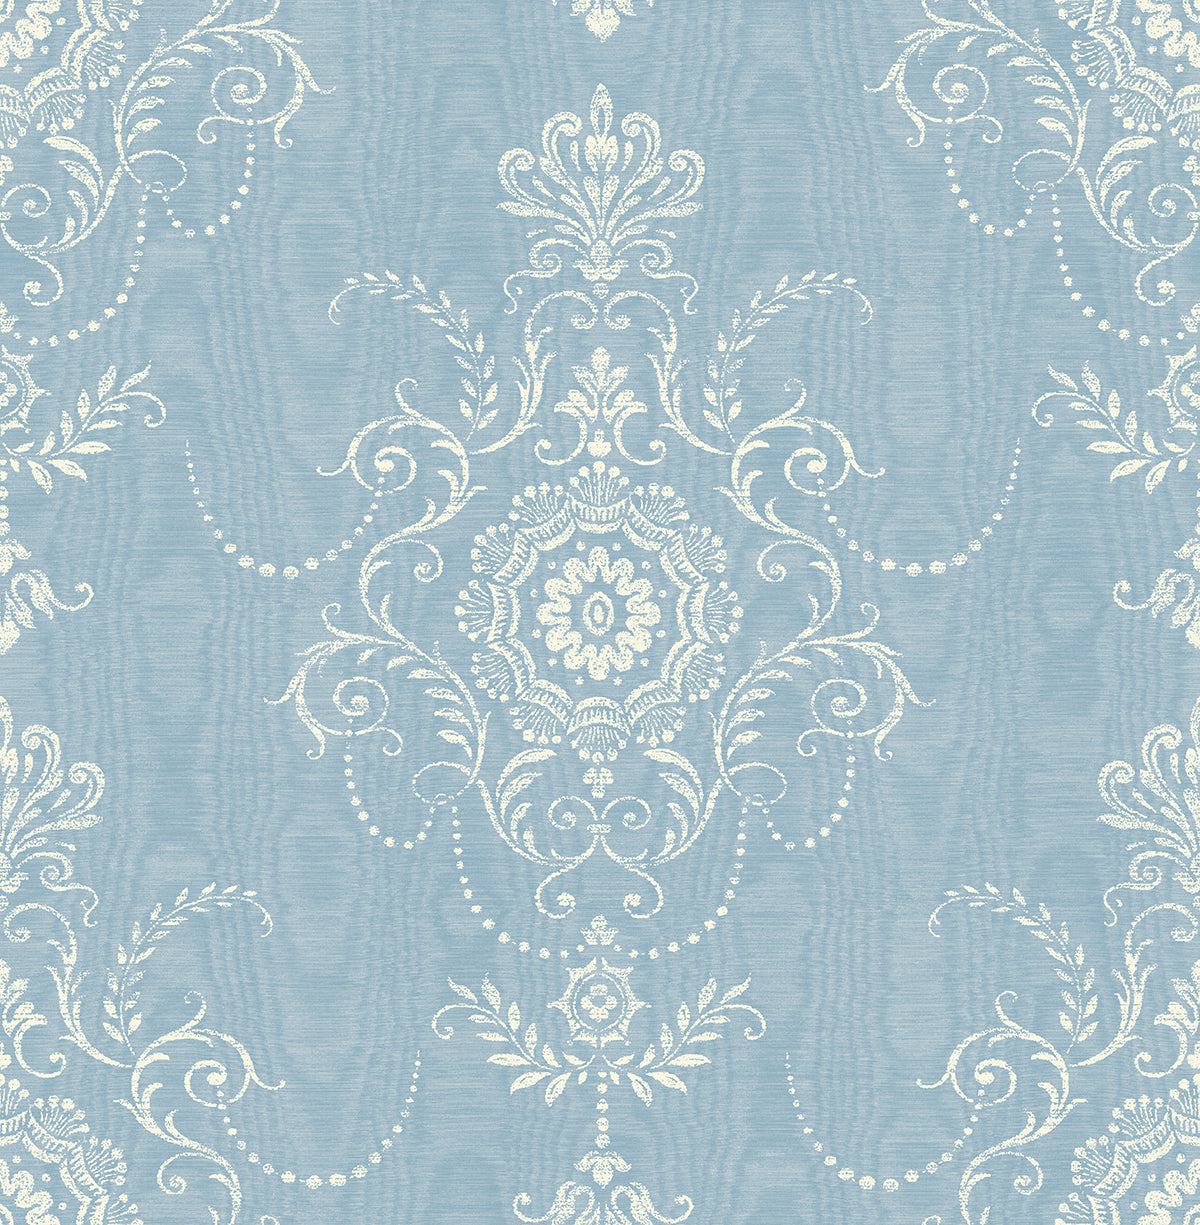 Seabrook Designs FC60302 French Country Colette Cameo  Wallpaper Bleu Bisque